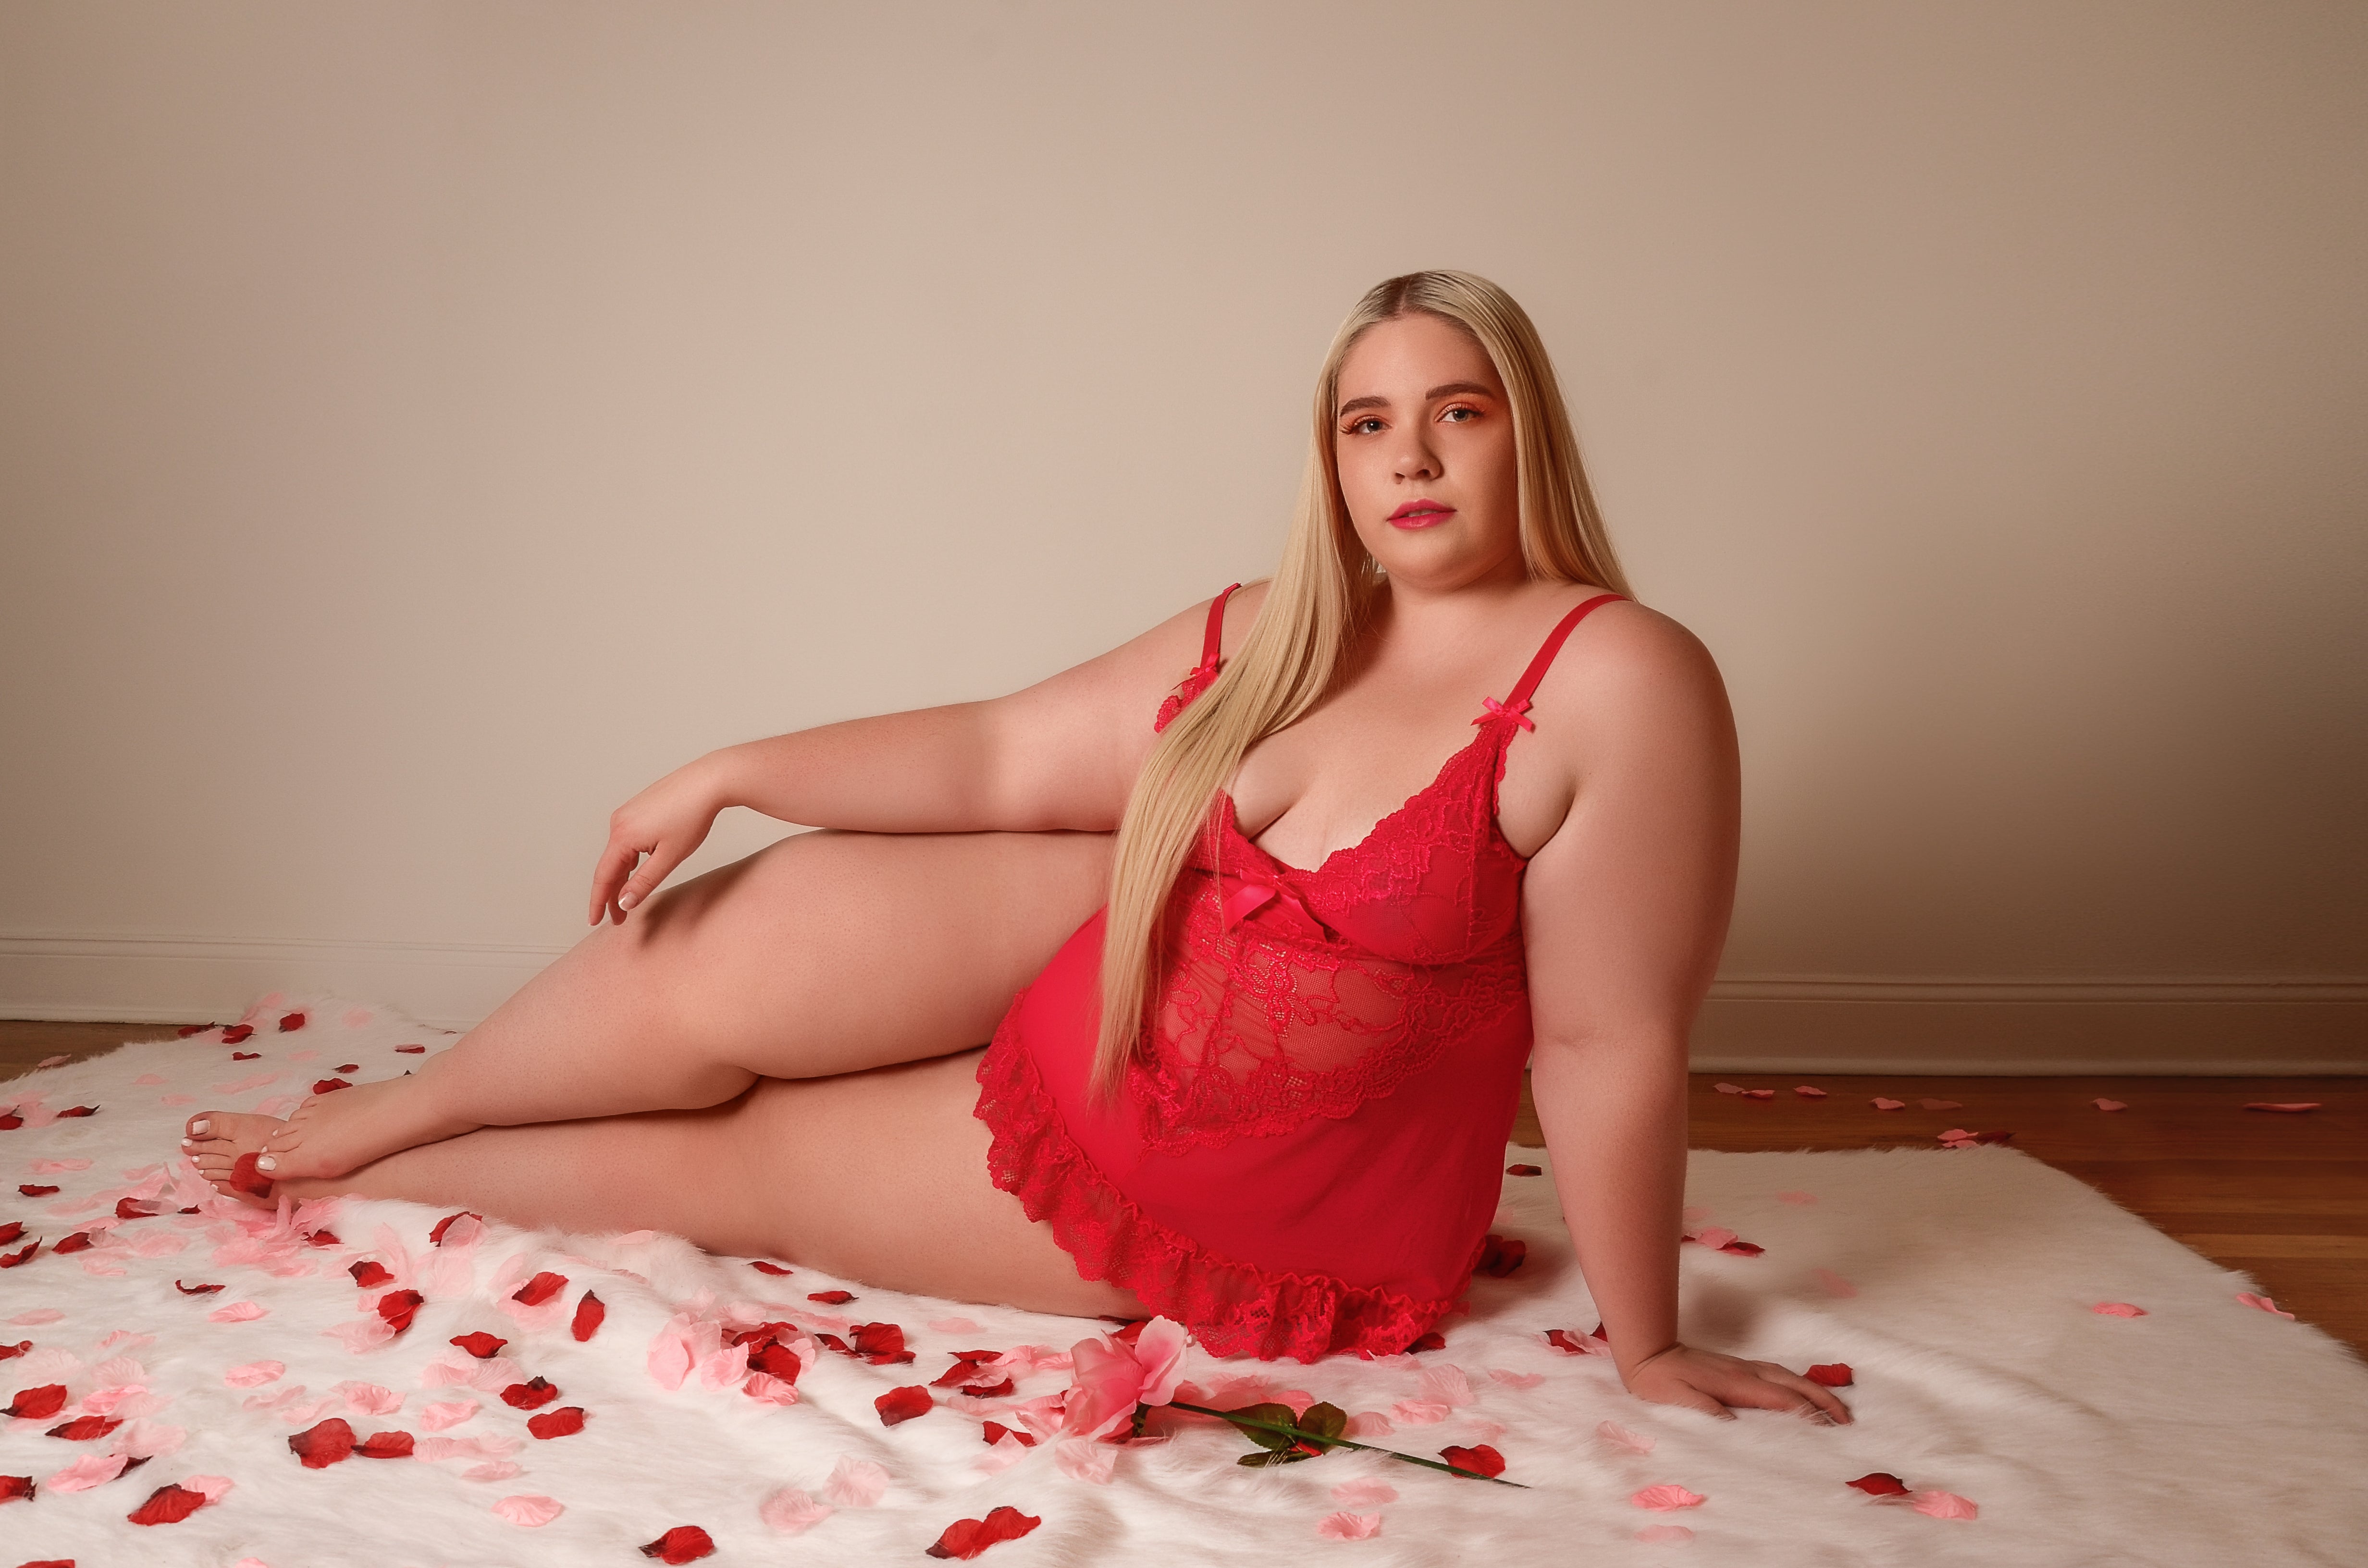 6 Curvy Lingerie Ideas for Valentine's Day